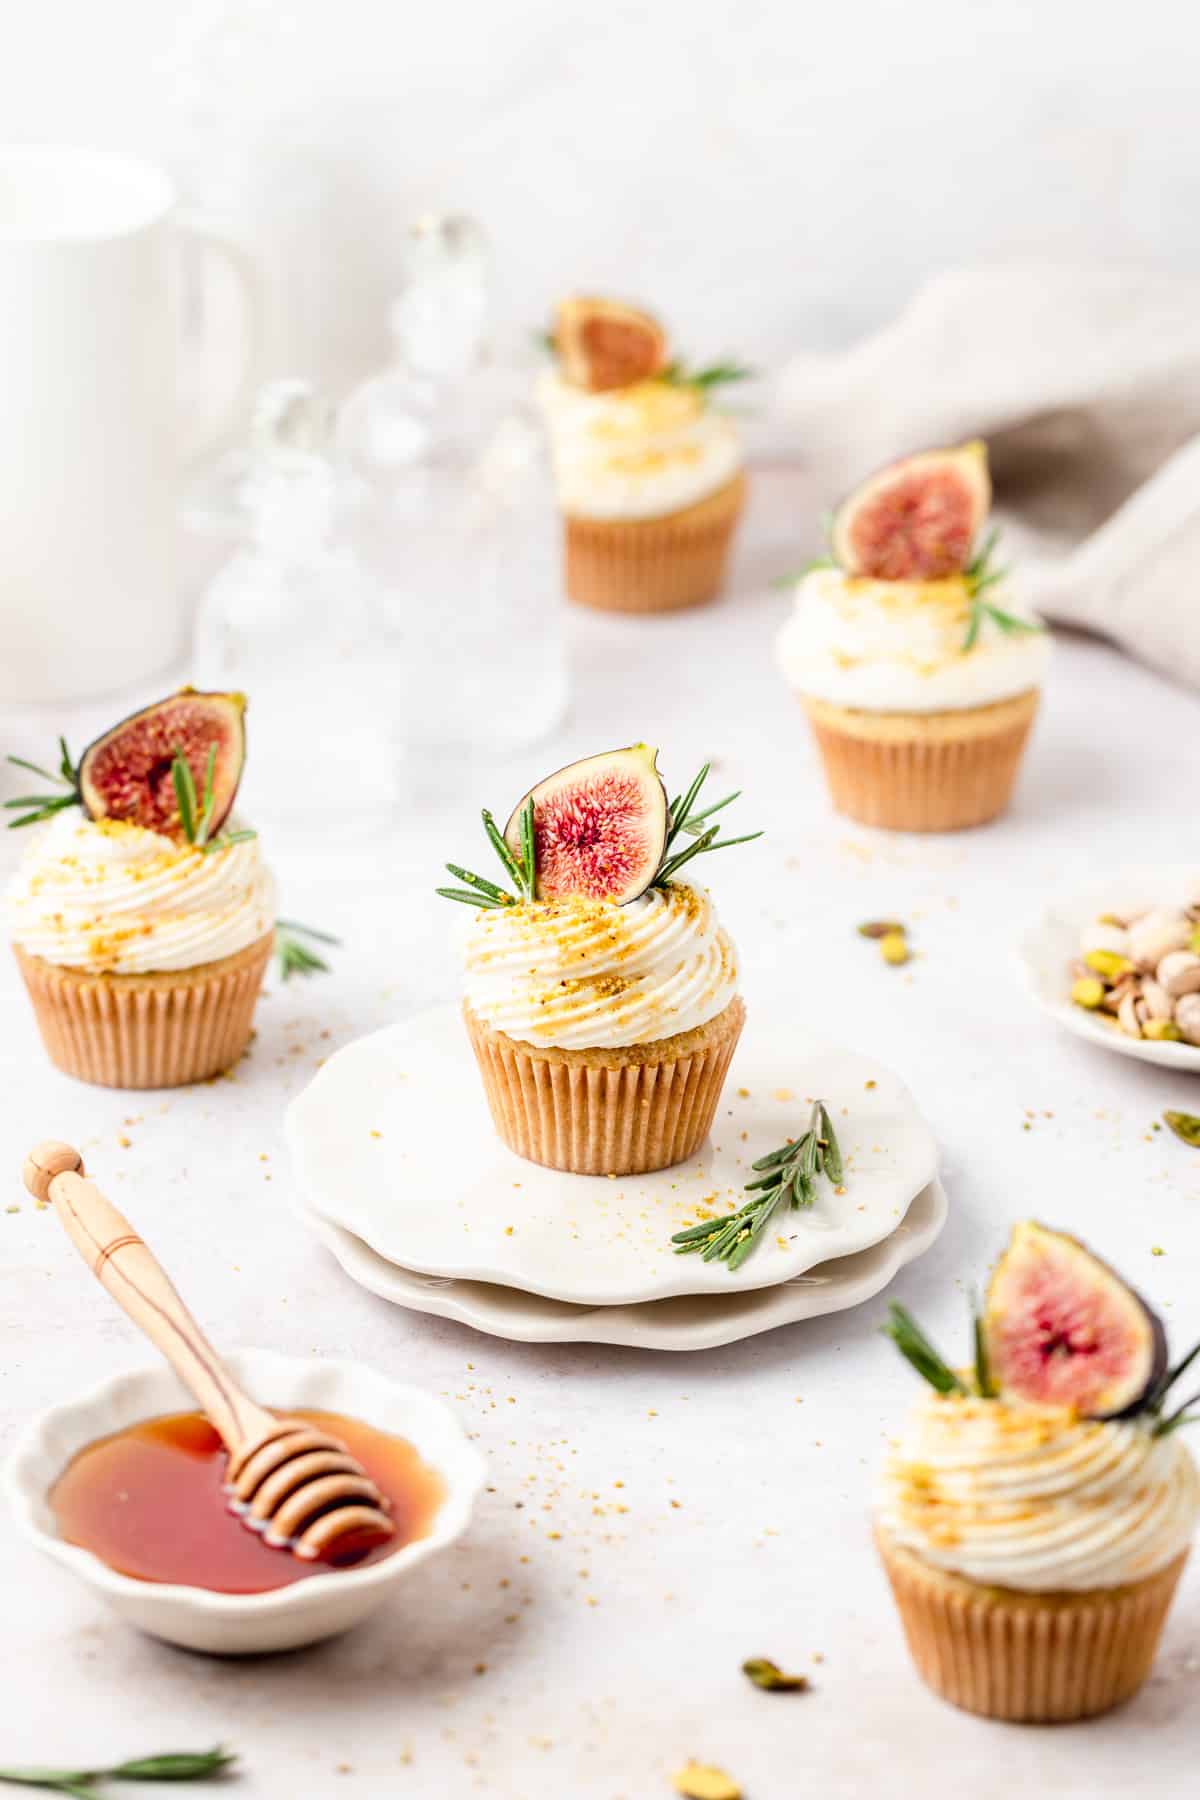 fig olive oil cupcakes topped with fresh figs, rosemary, and honey.